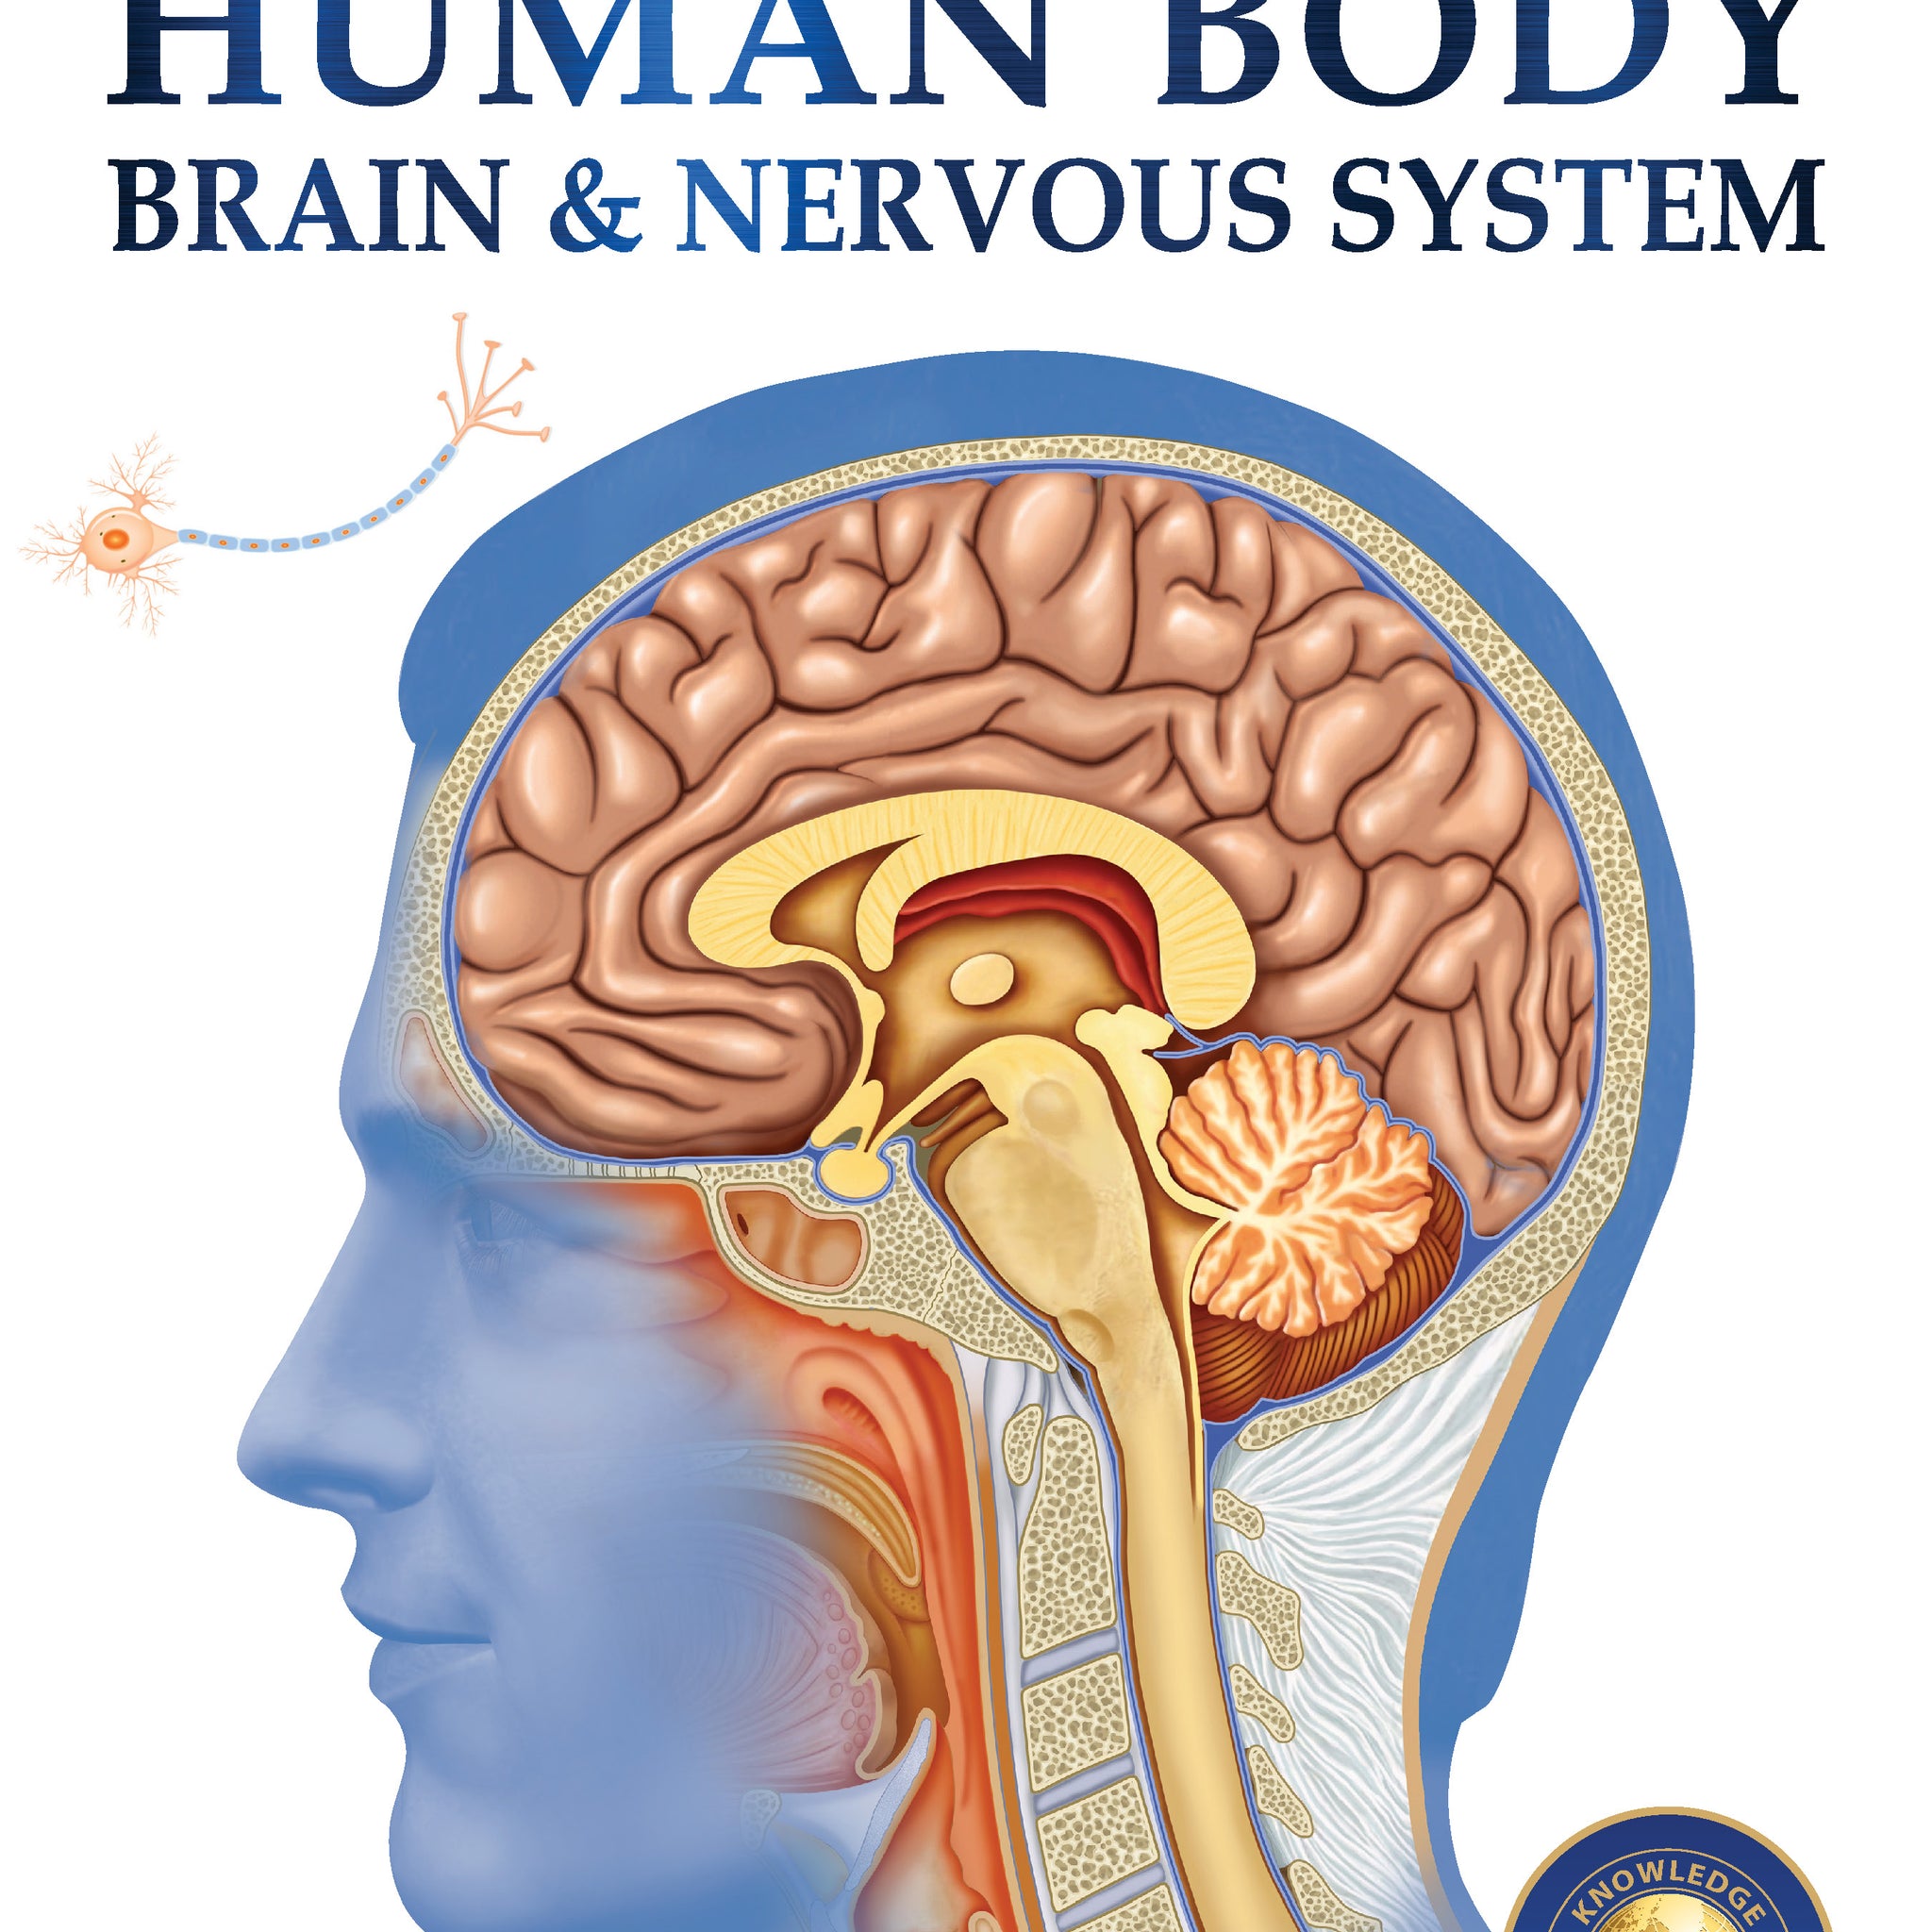 Human Body - Brain And Nervous System: Knowledge Encyclopedia For Children